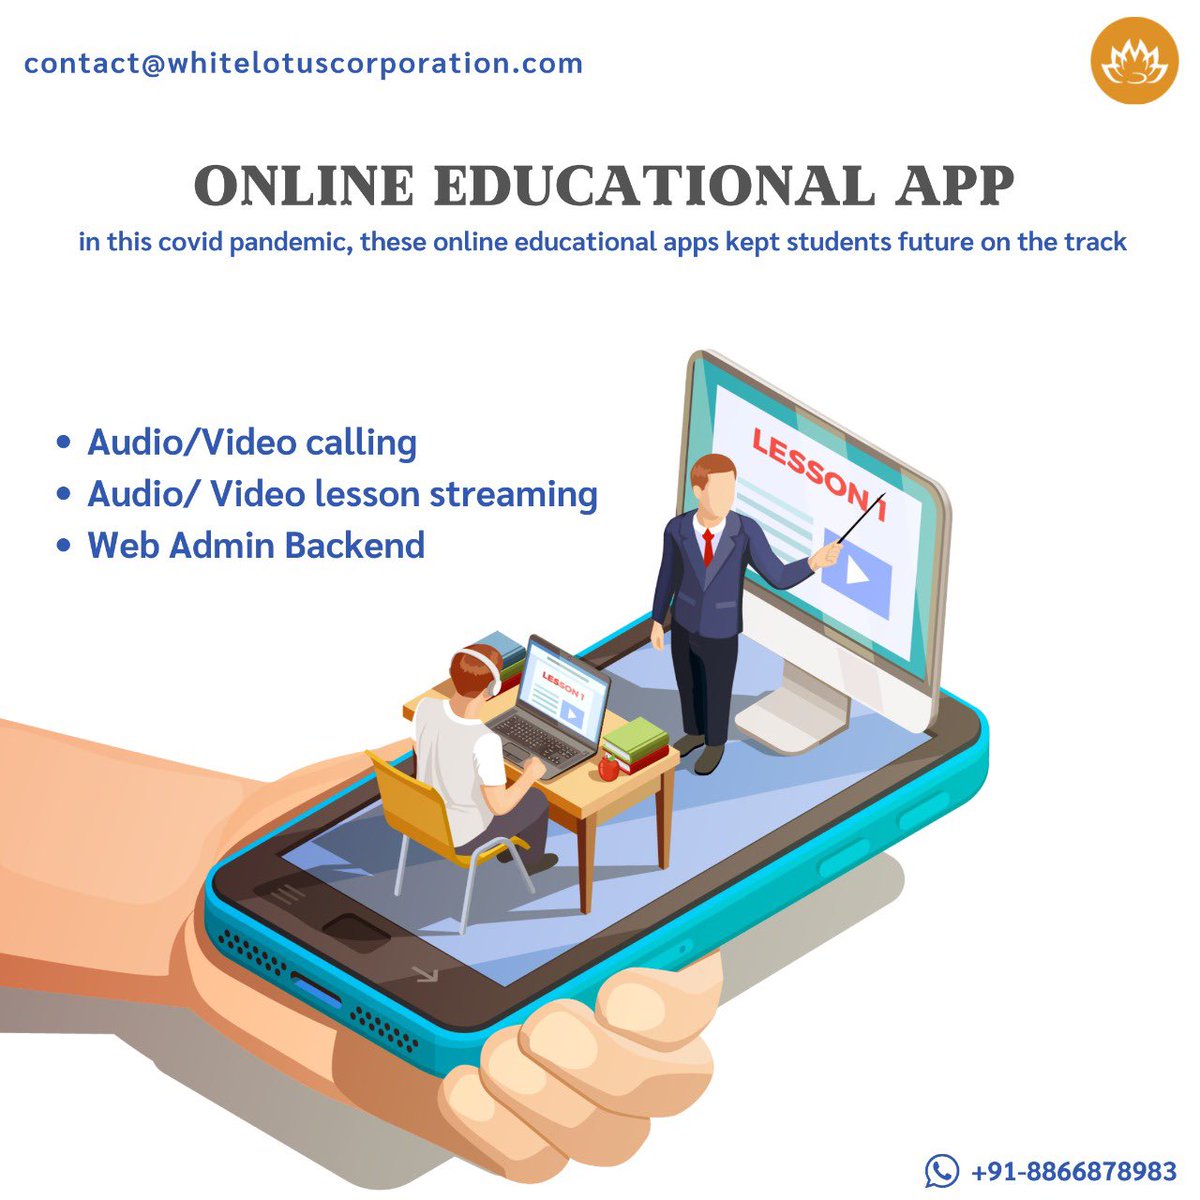 #COVID19 pandemic didn’t stopped education! Thanks to the modern apps and technology which kept students future on the track by providing online education facilities with video sessions

We help build your #online #education app ideas. Let’s talk. 
#digitialeducation #mobileapps